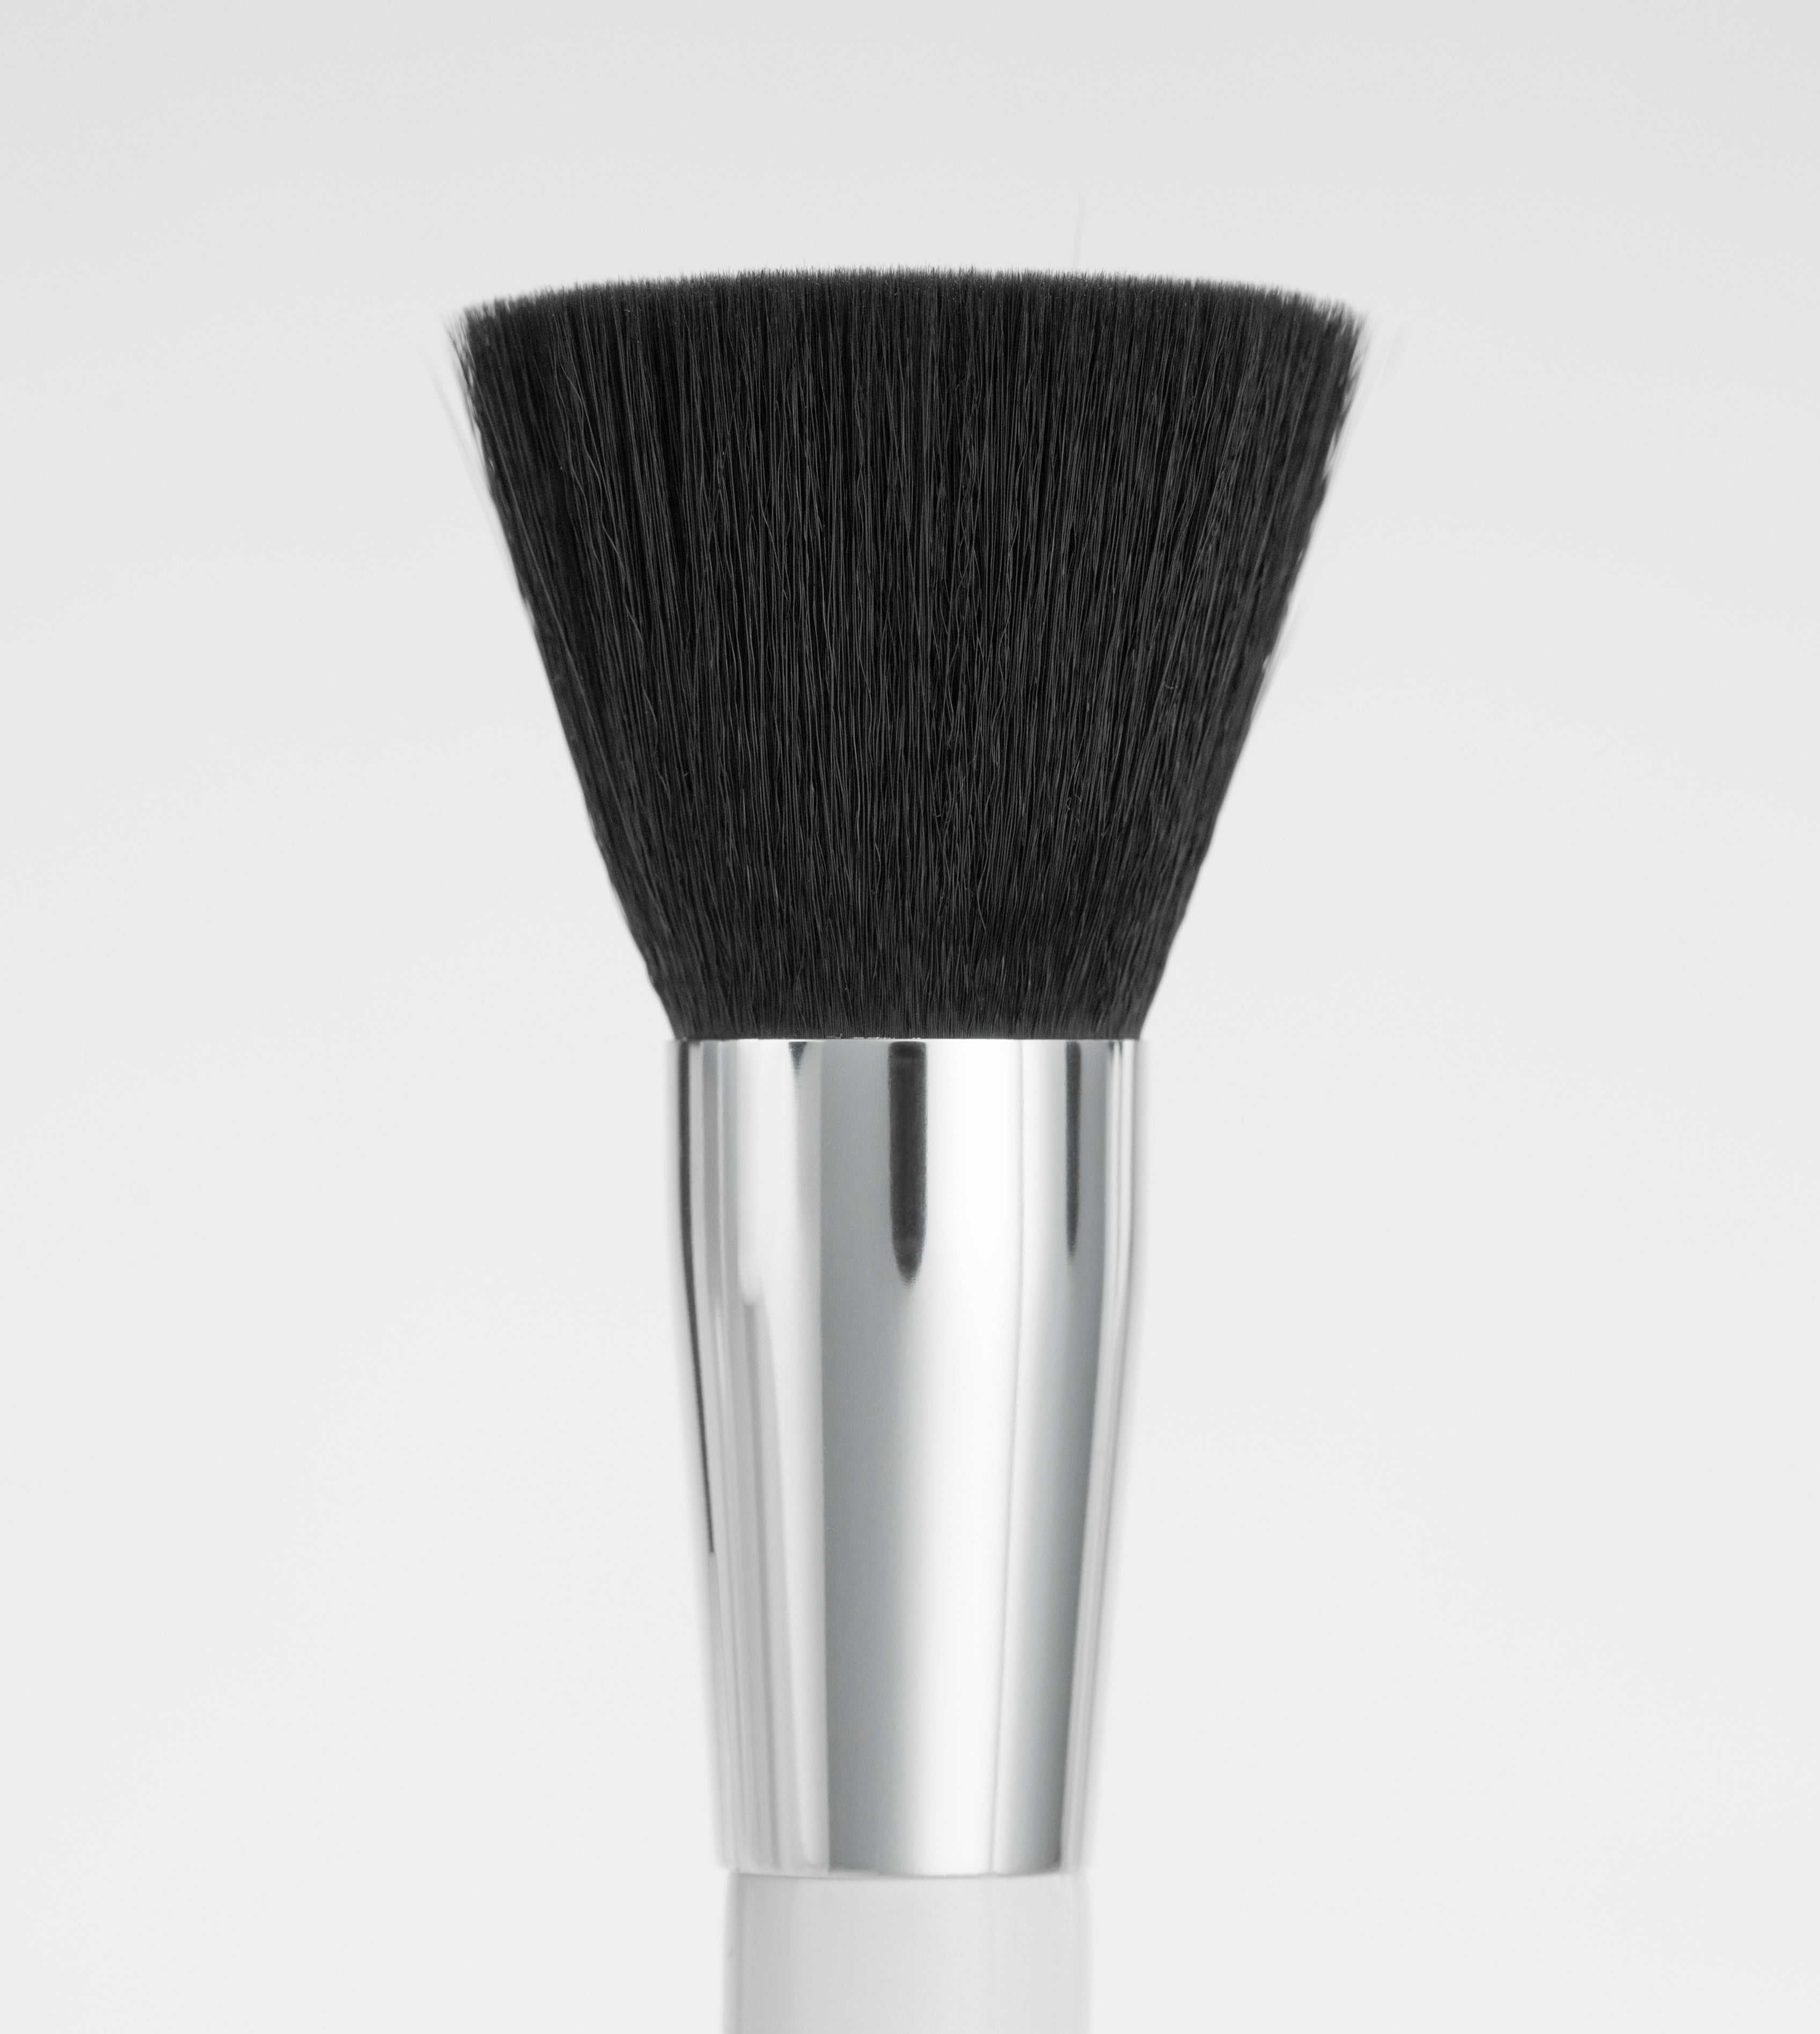 the blend end of the blush and blend makeup brush